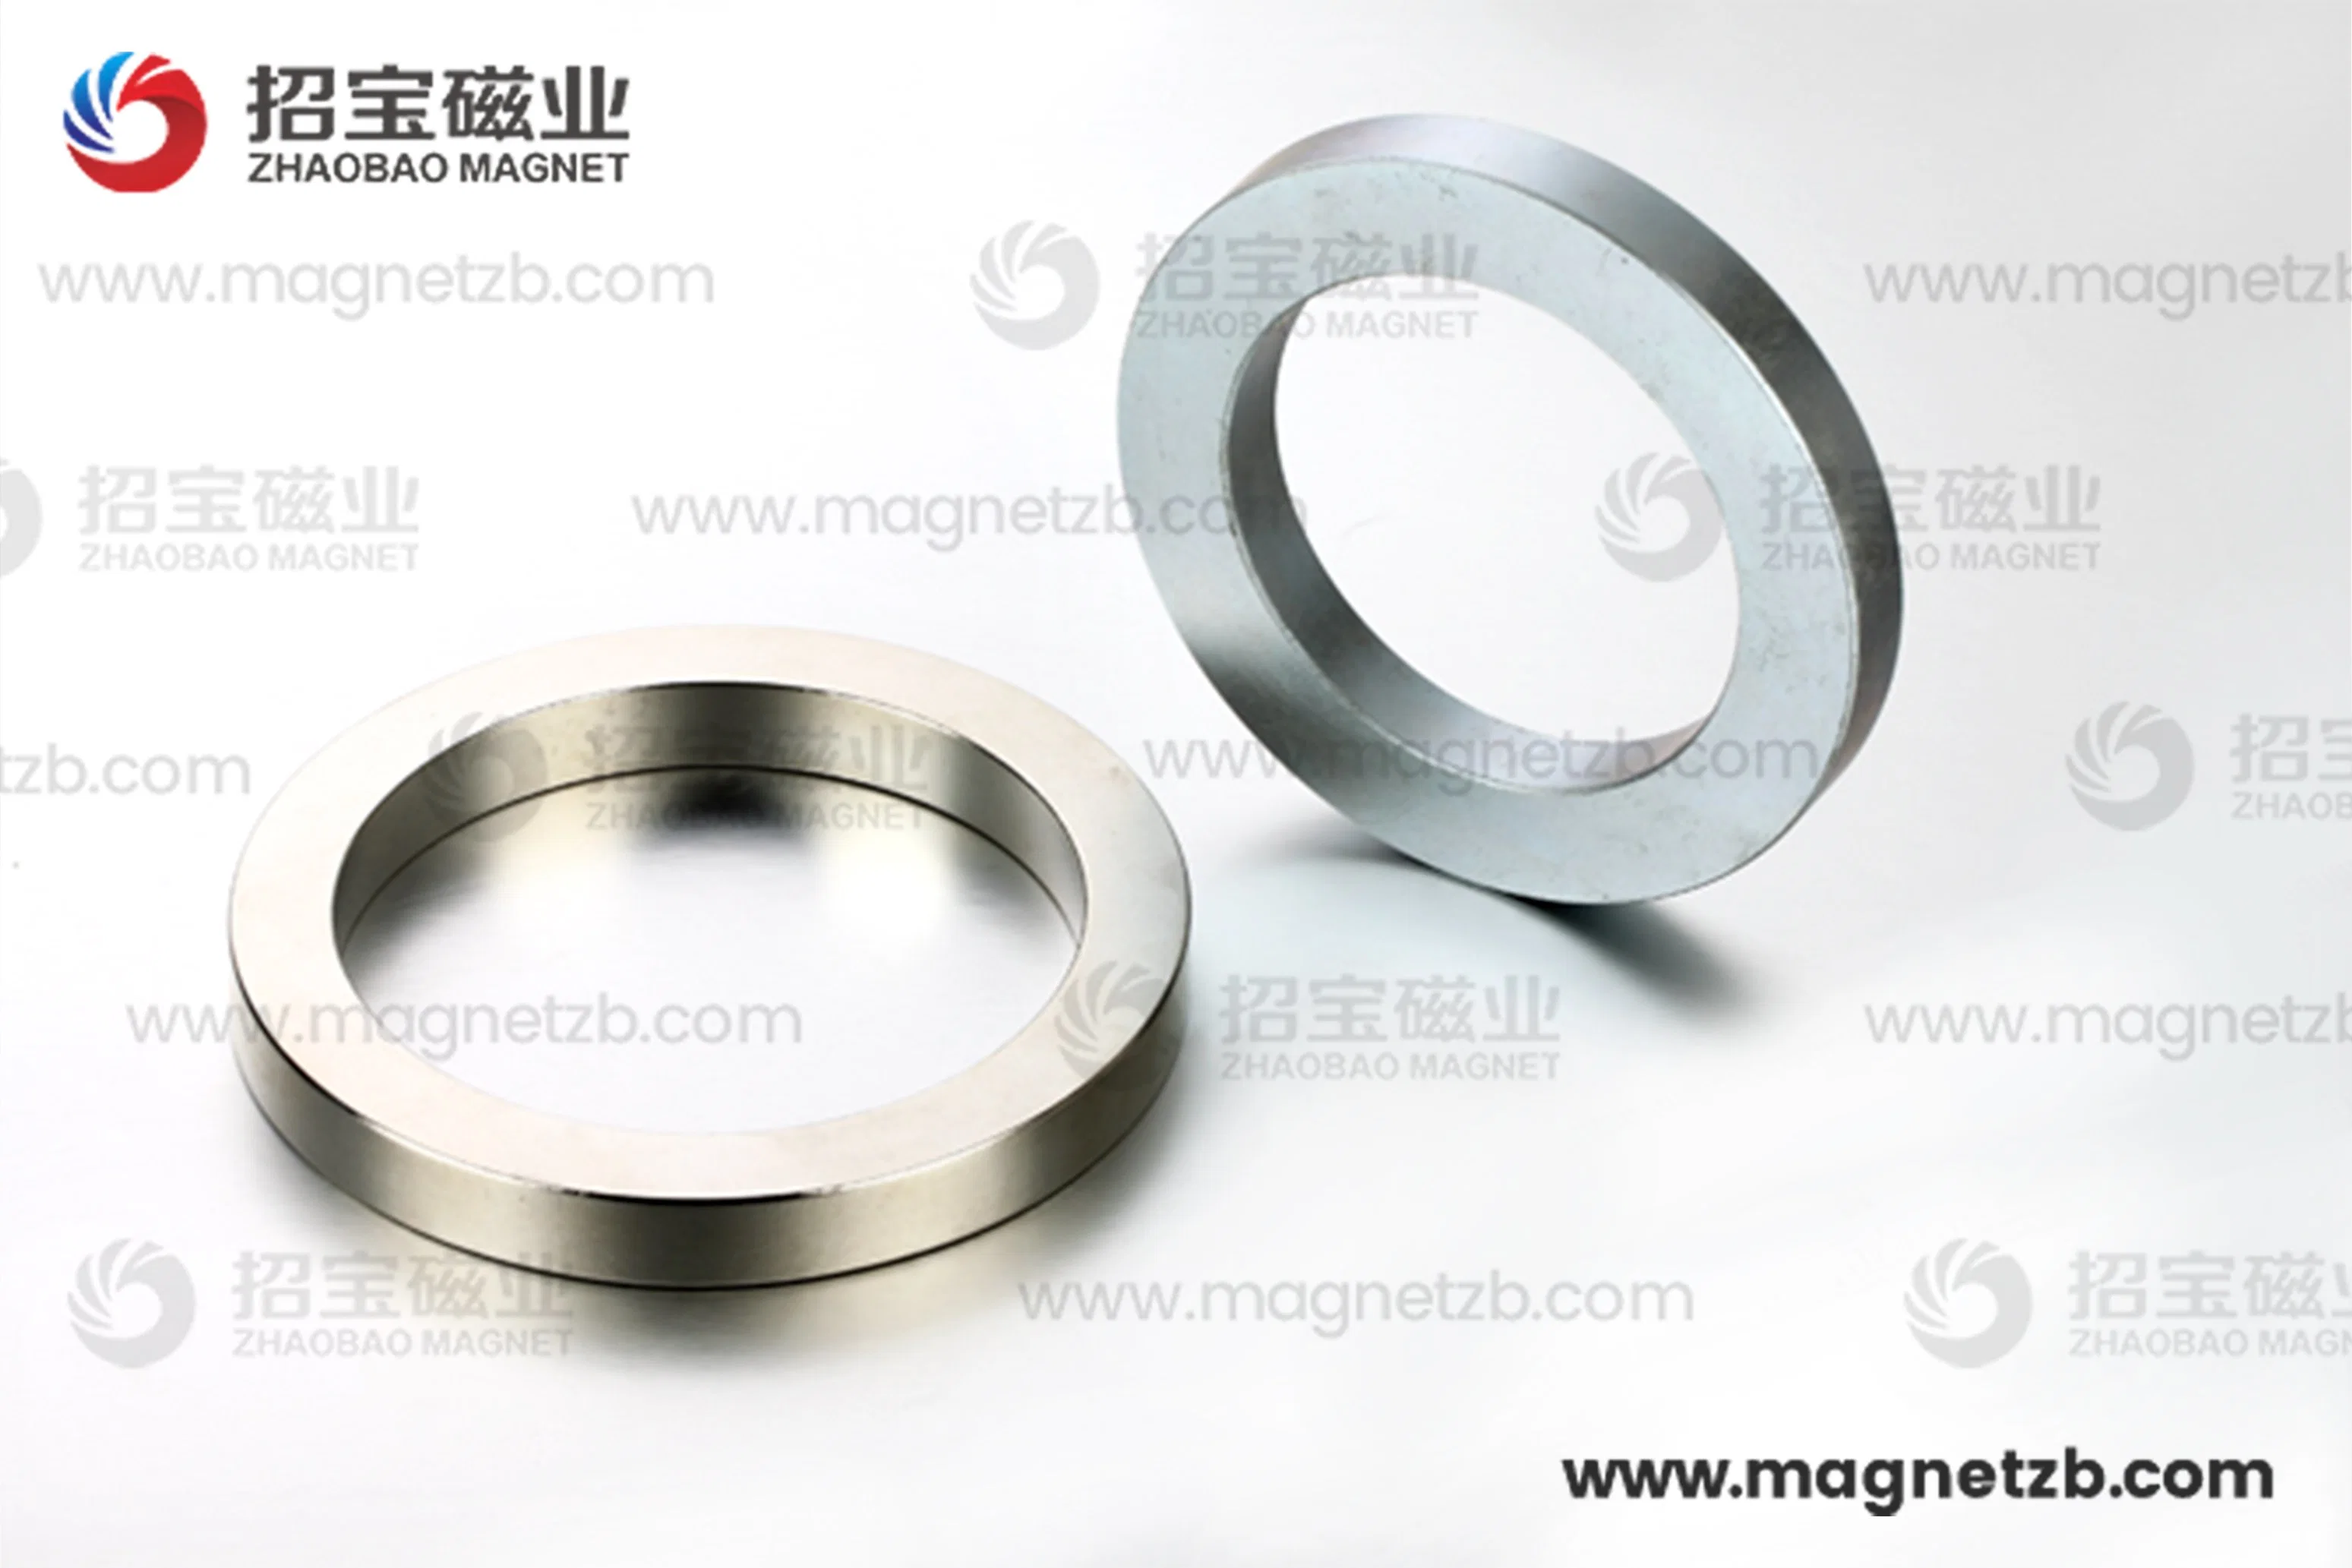 Radial Orientation High Quality Rare Earth Permanent Strong Magnetic Material Customized Industry Sintered Neo Neodymium NdFeB Little Magnet Ring with Coated